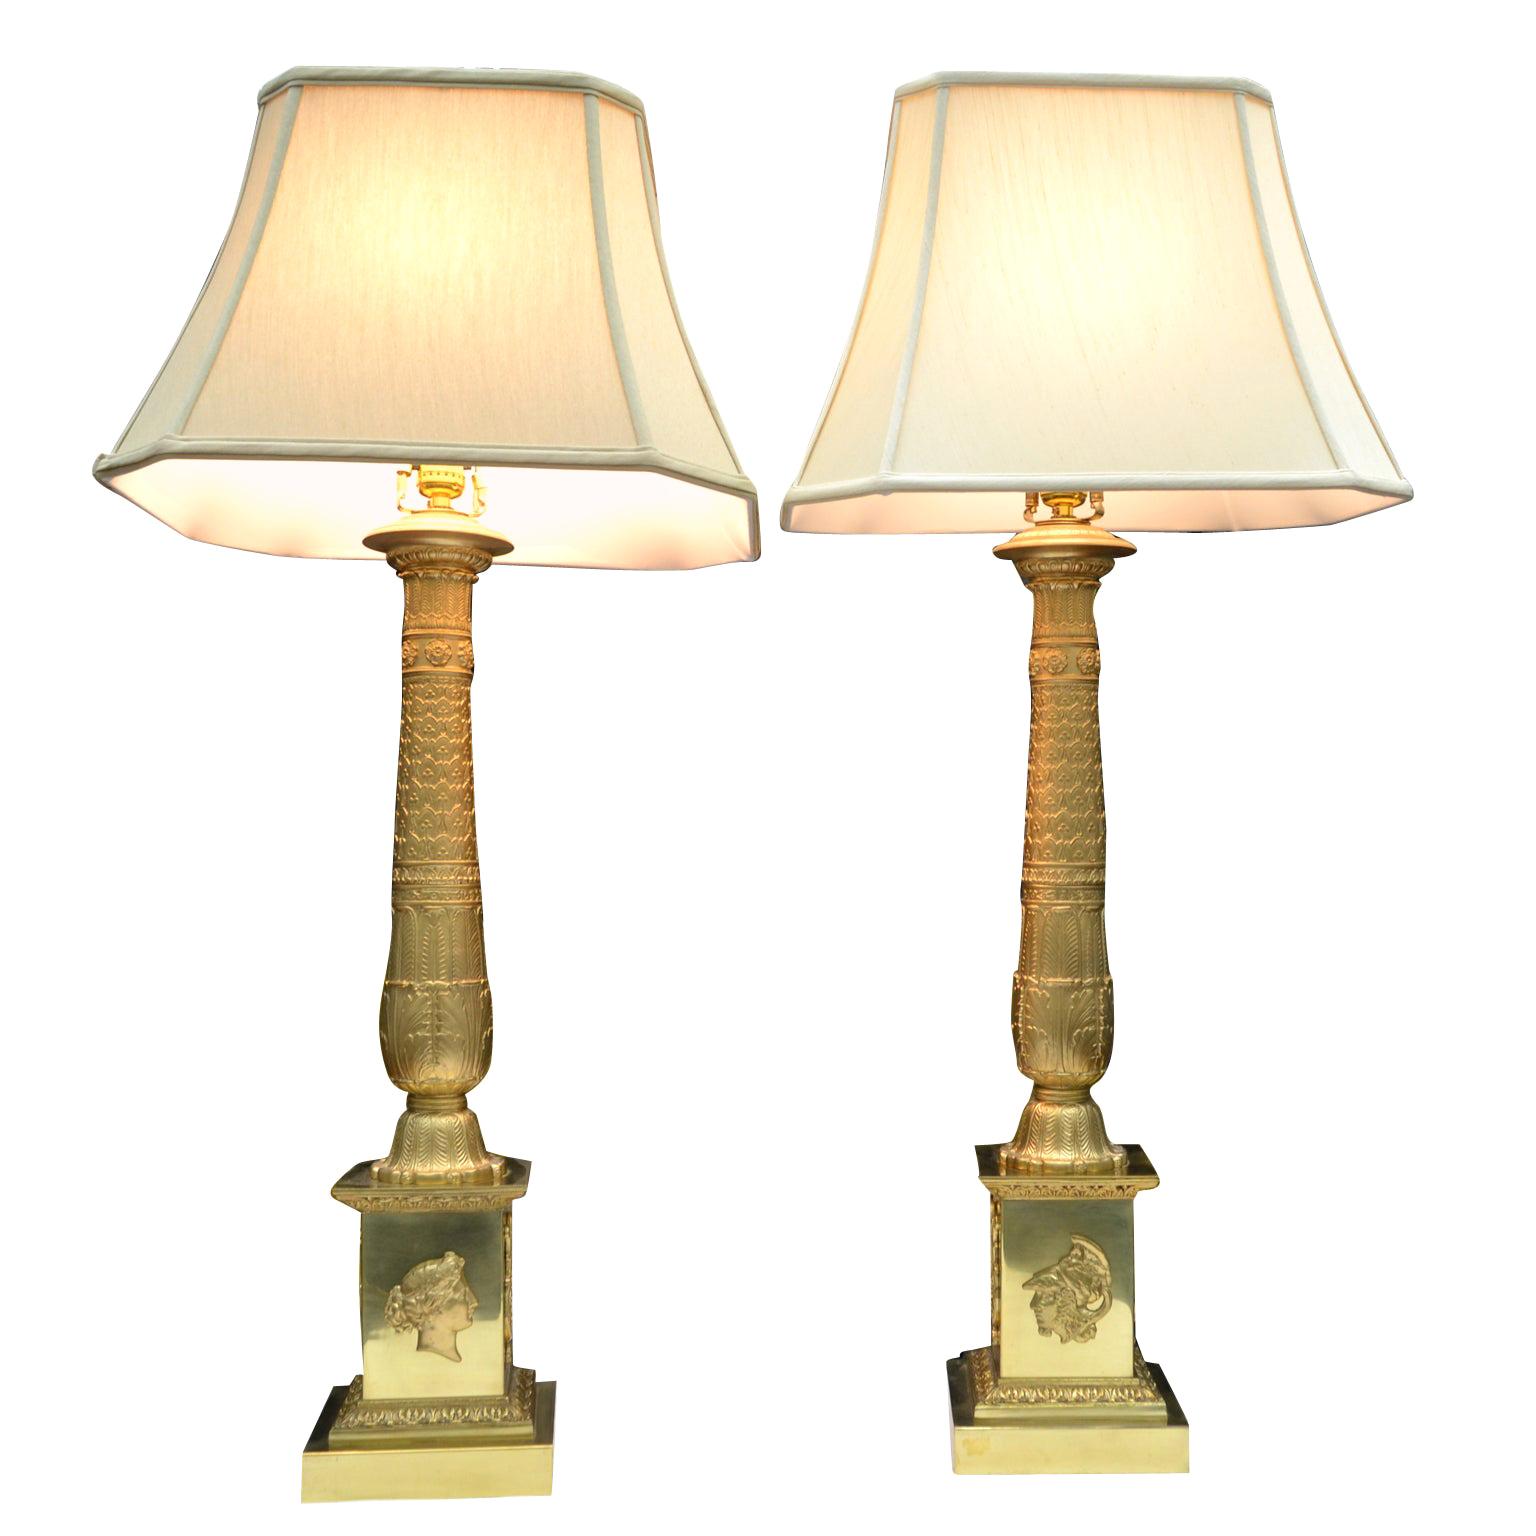 Pair of French Empire Style Gilded Metal Column Lamps